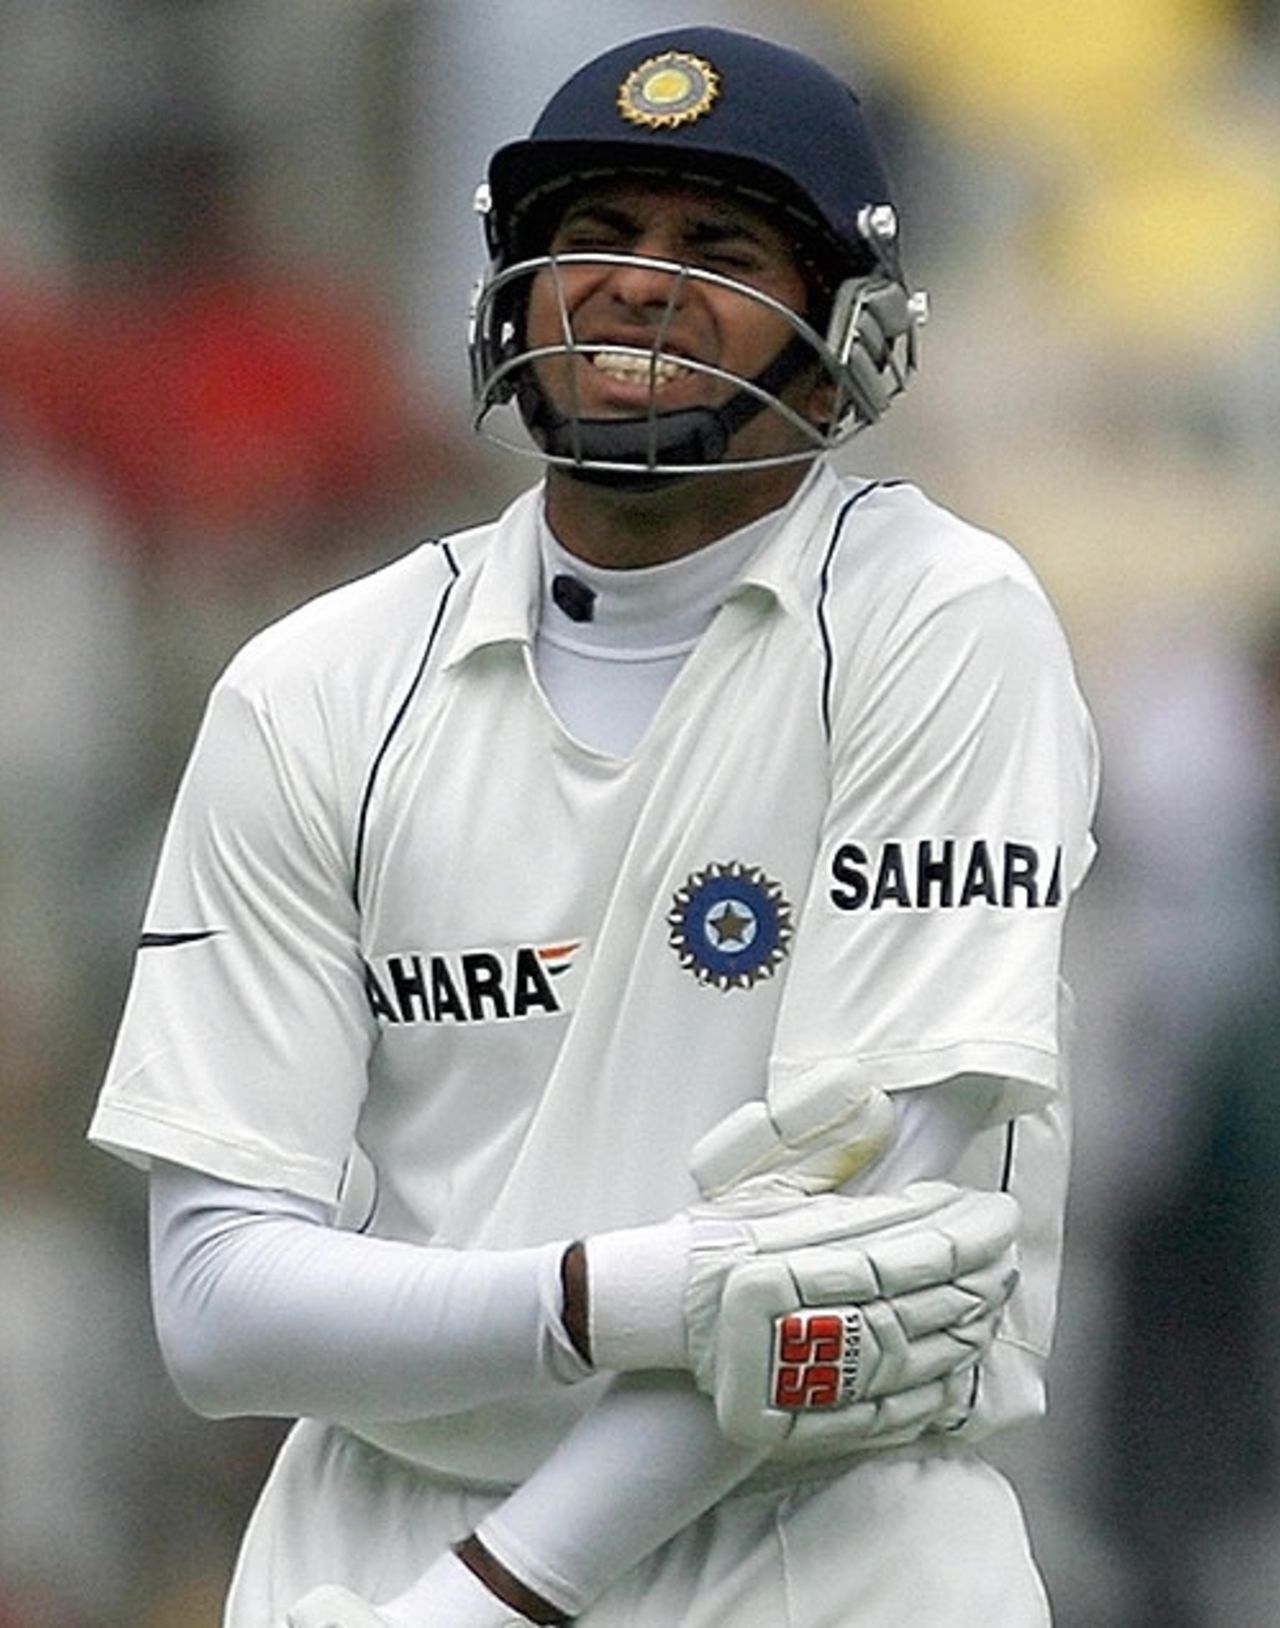 VVS Laxman winces in pain after a bouncer struck his left elbow, India v Pakistan, 3rd Test, Bangalore, 5th day, December 12, 2007 

